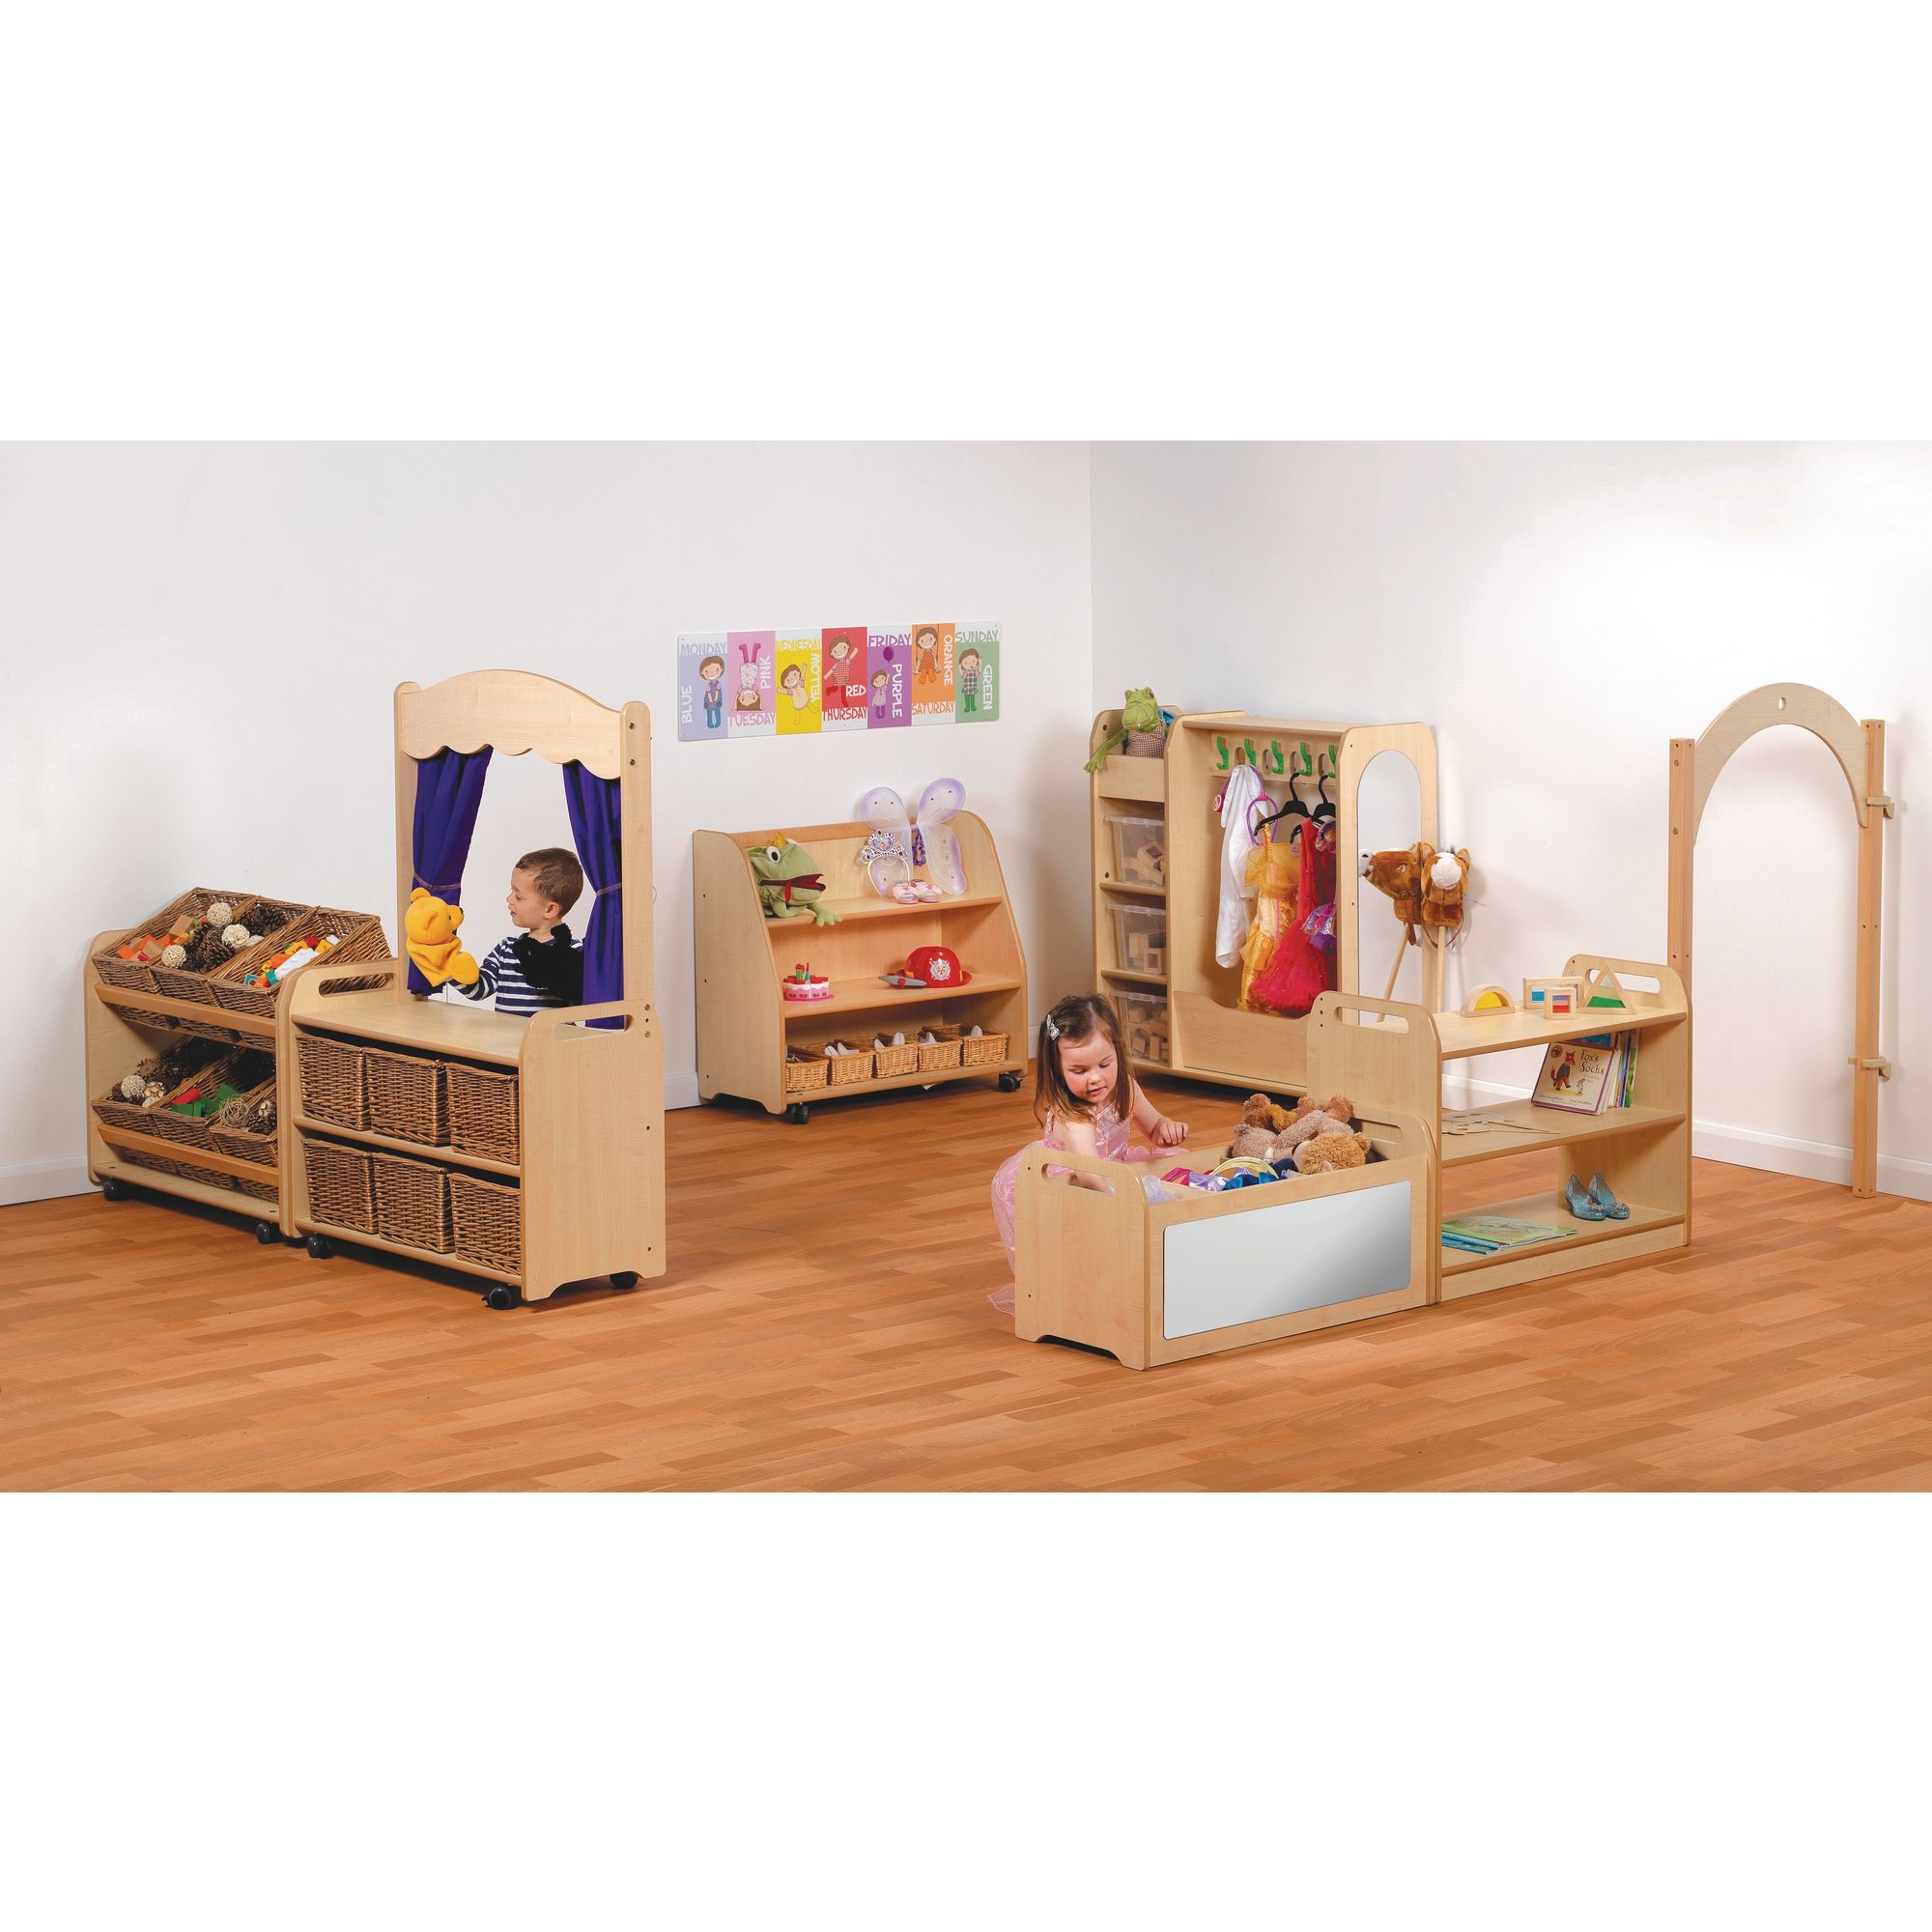 Playscapes Playscapes Dressing Up Zone